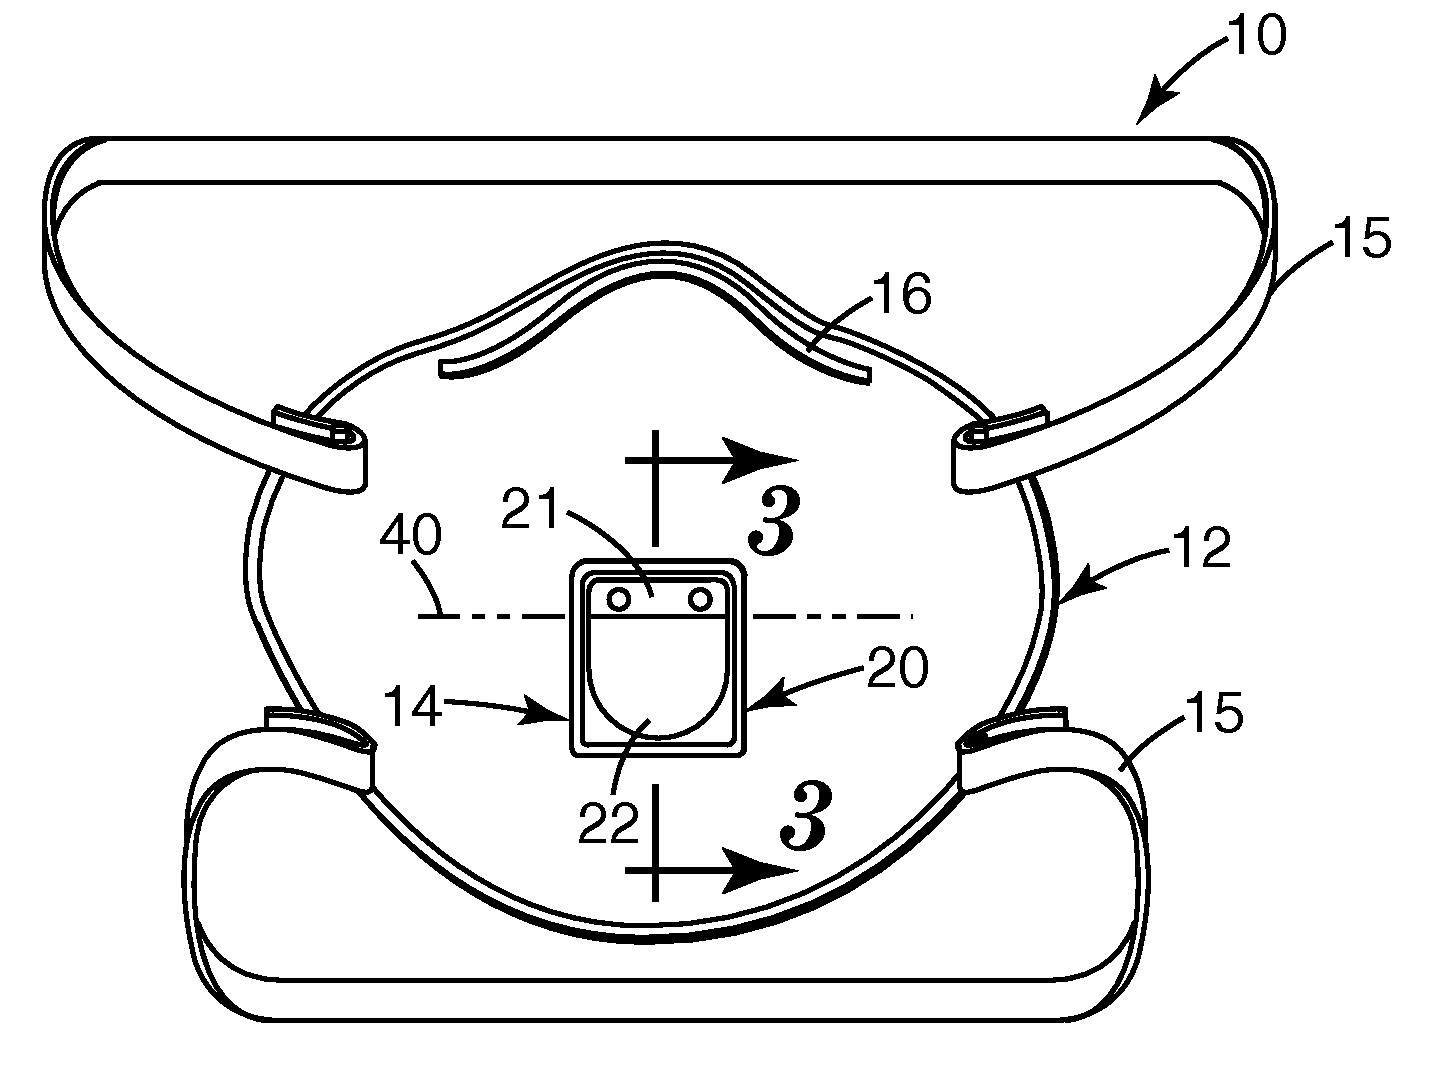 Filtering face mask with a unidirectional valve having a stiff unbiased flexible flap